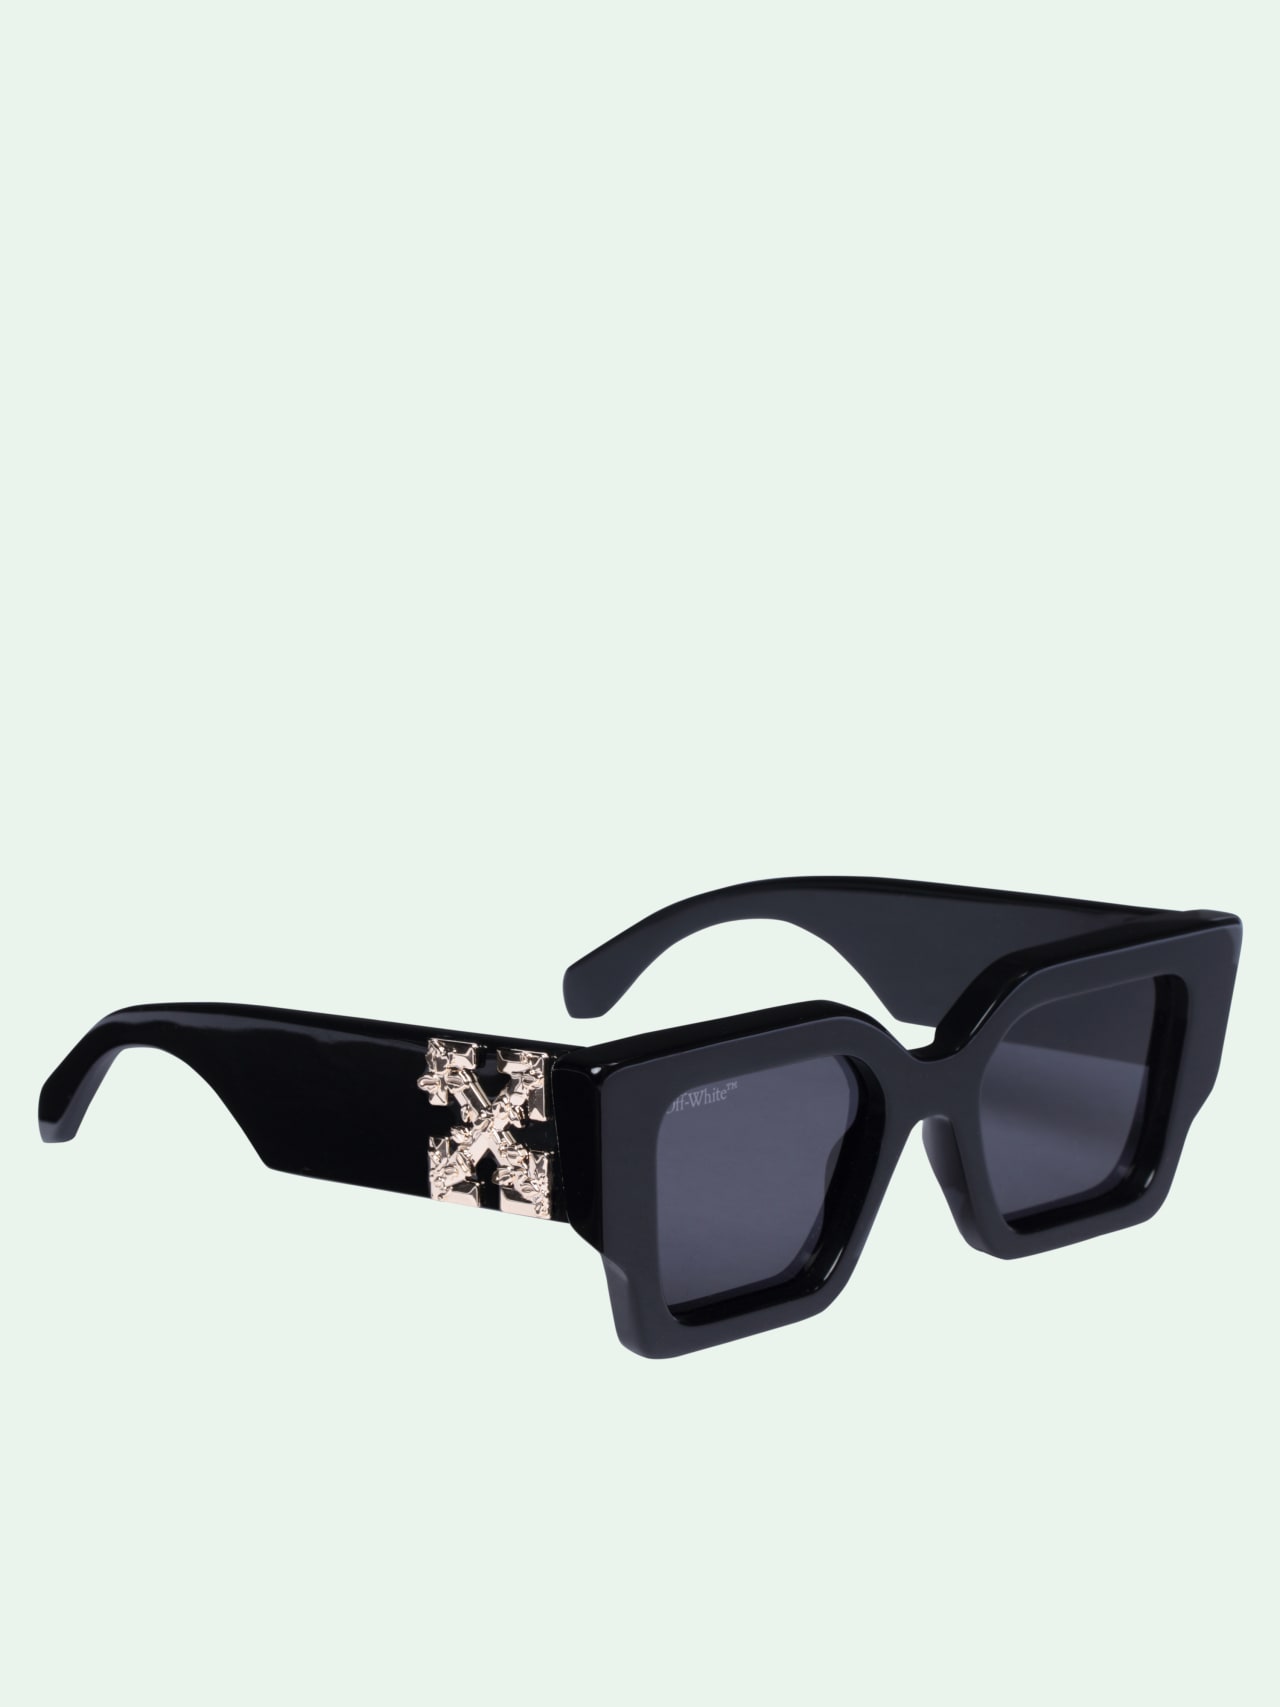 Virgil Abloh's Launches Label's First Full Eyewear Collection | Complex